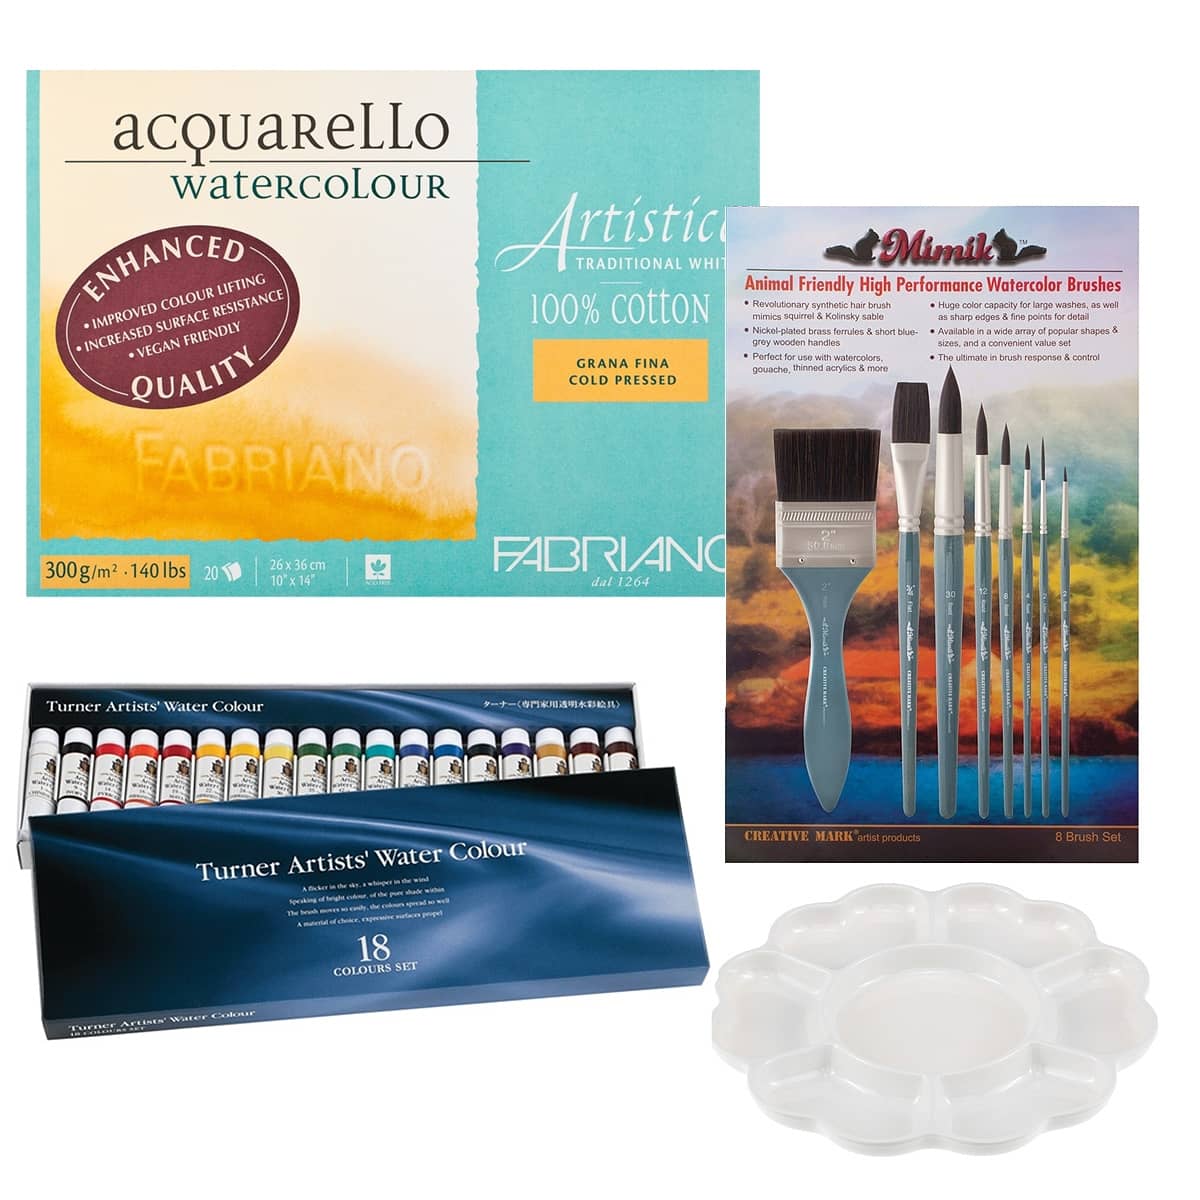 Turner Artist's Watercolor Complete Painting Set